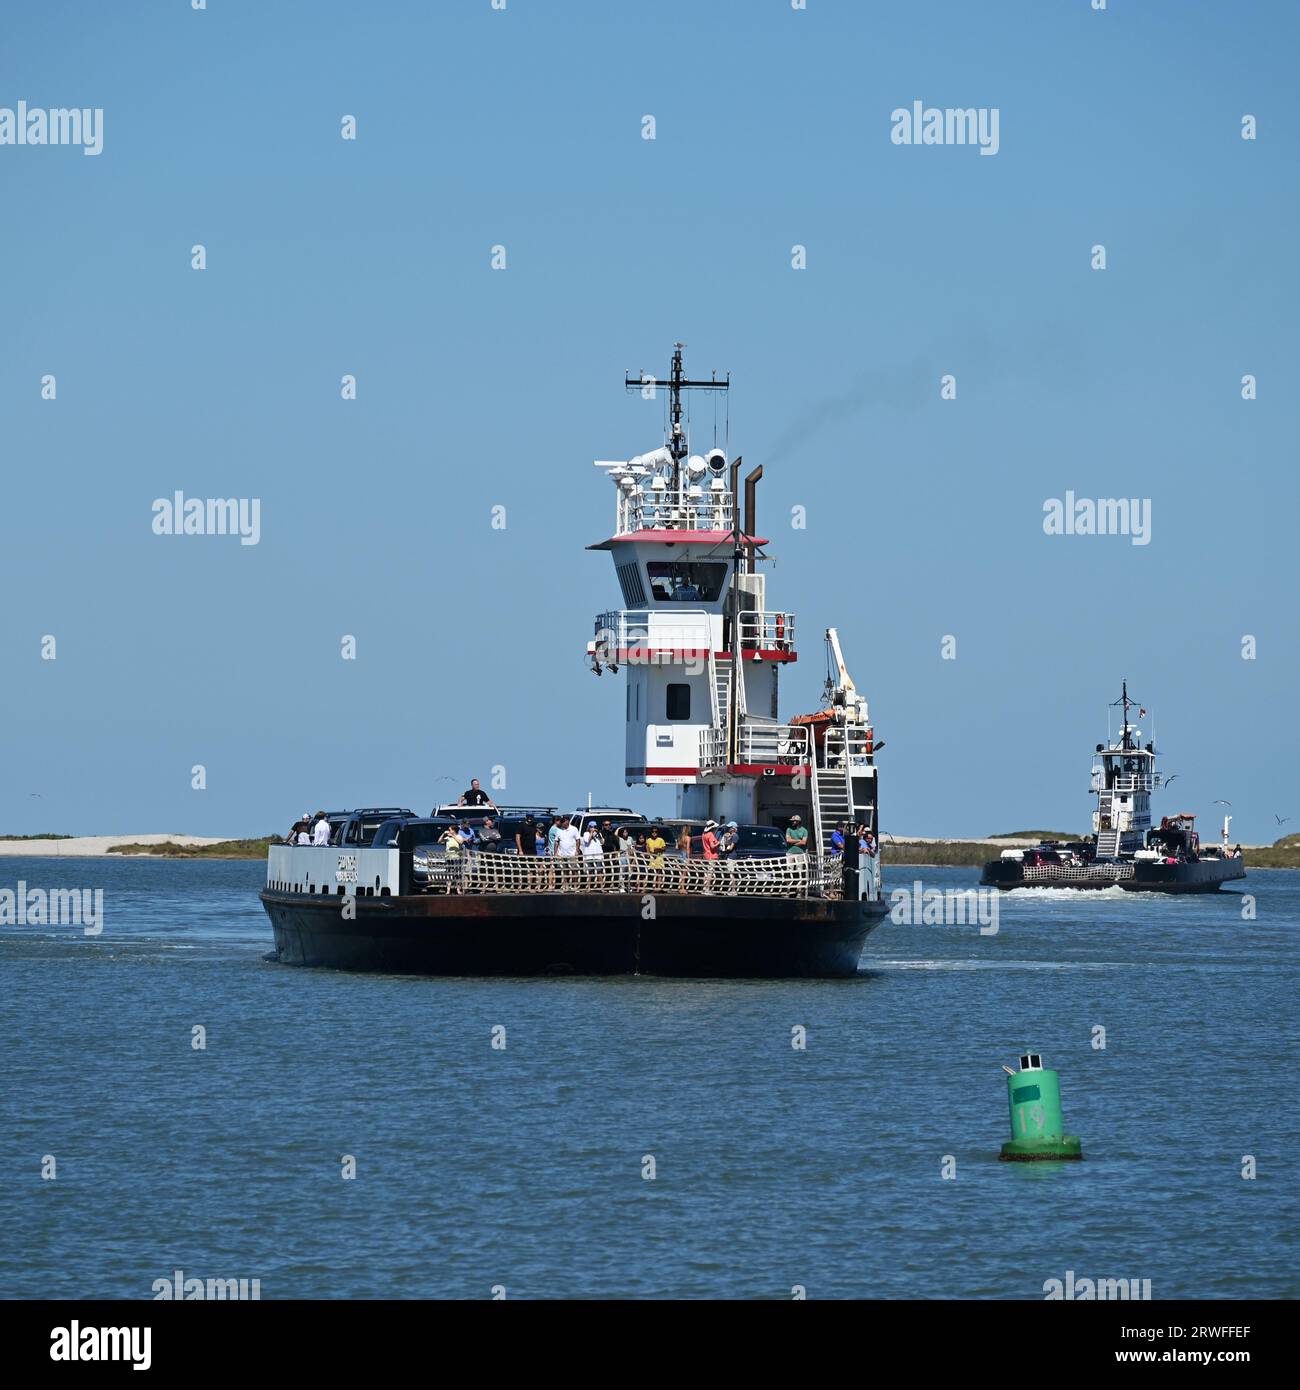 The car ferry Rodanthe crossing the Pamlico Sound between Hatteras Island and Ocracoke Island. Stock Photo